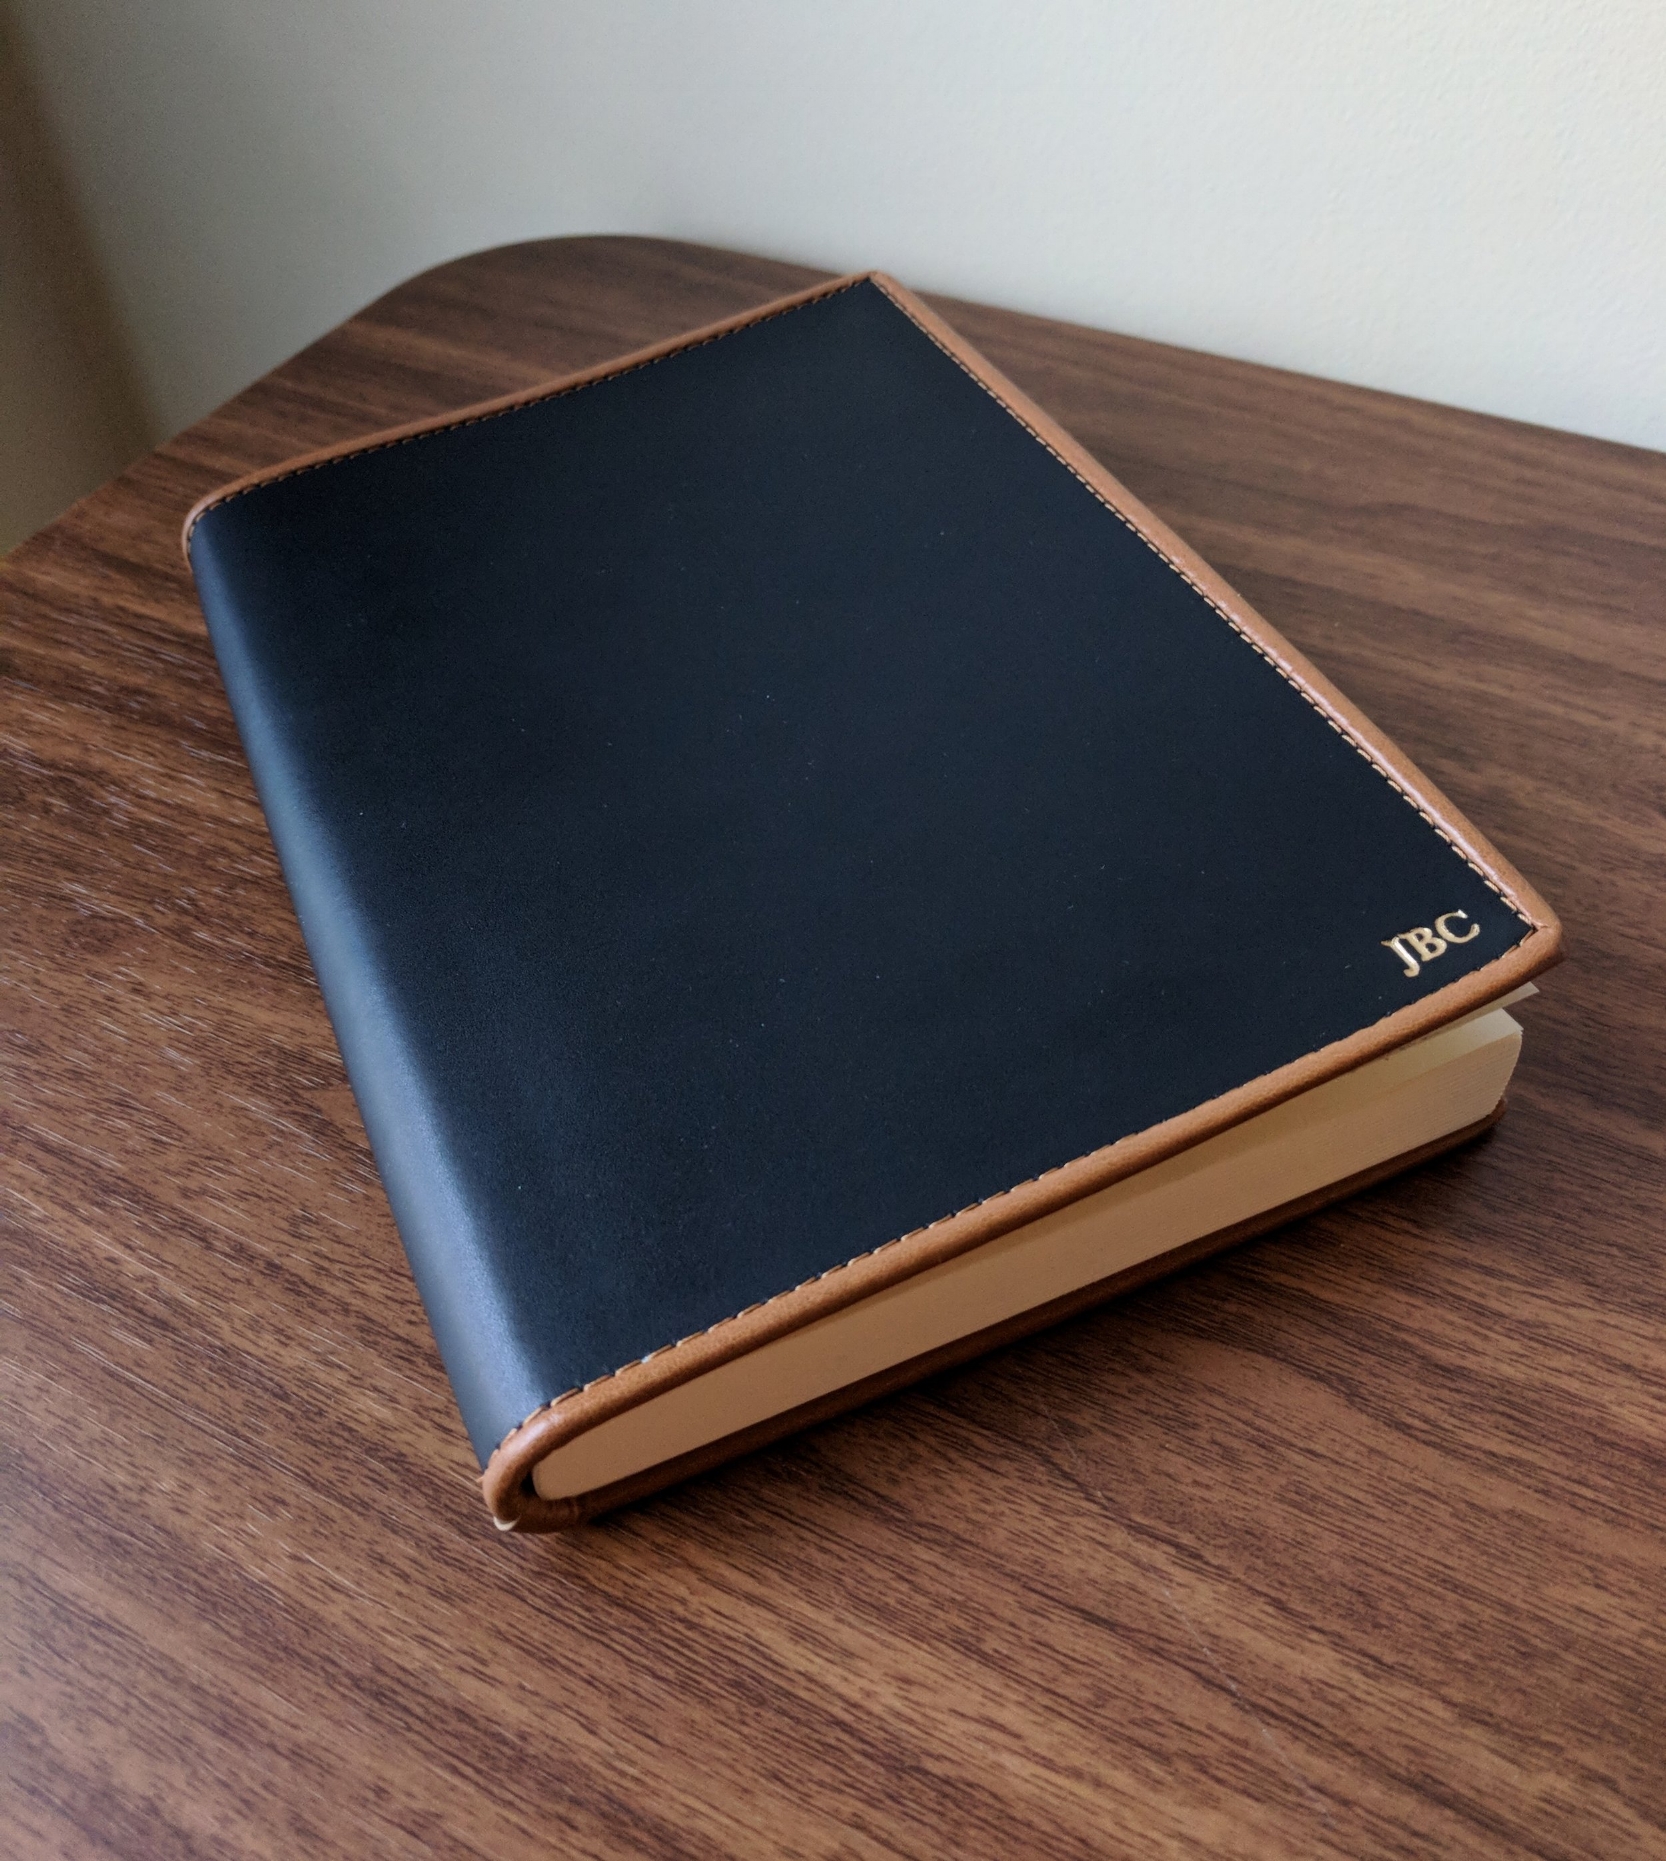 Thick Leather Journal - Extra Thick at 600 Pages - Handmade In Italy